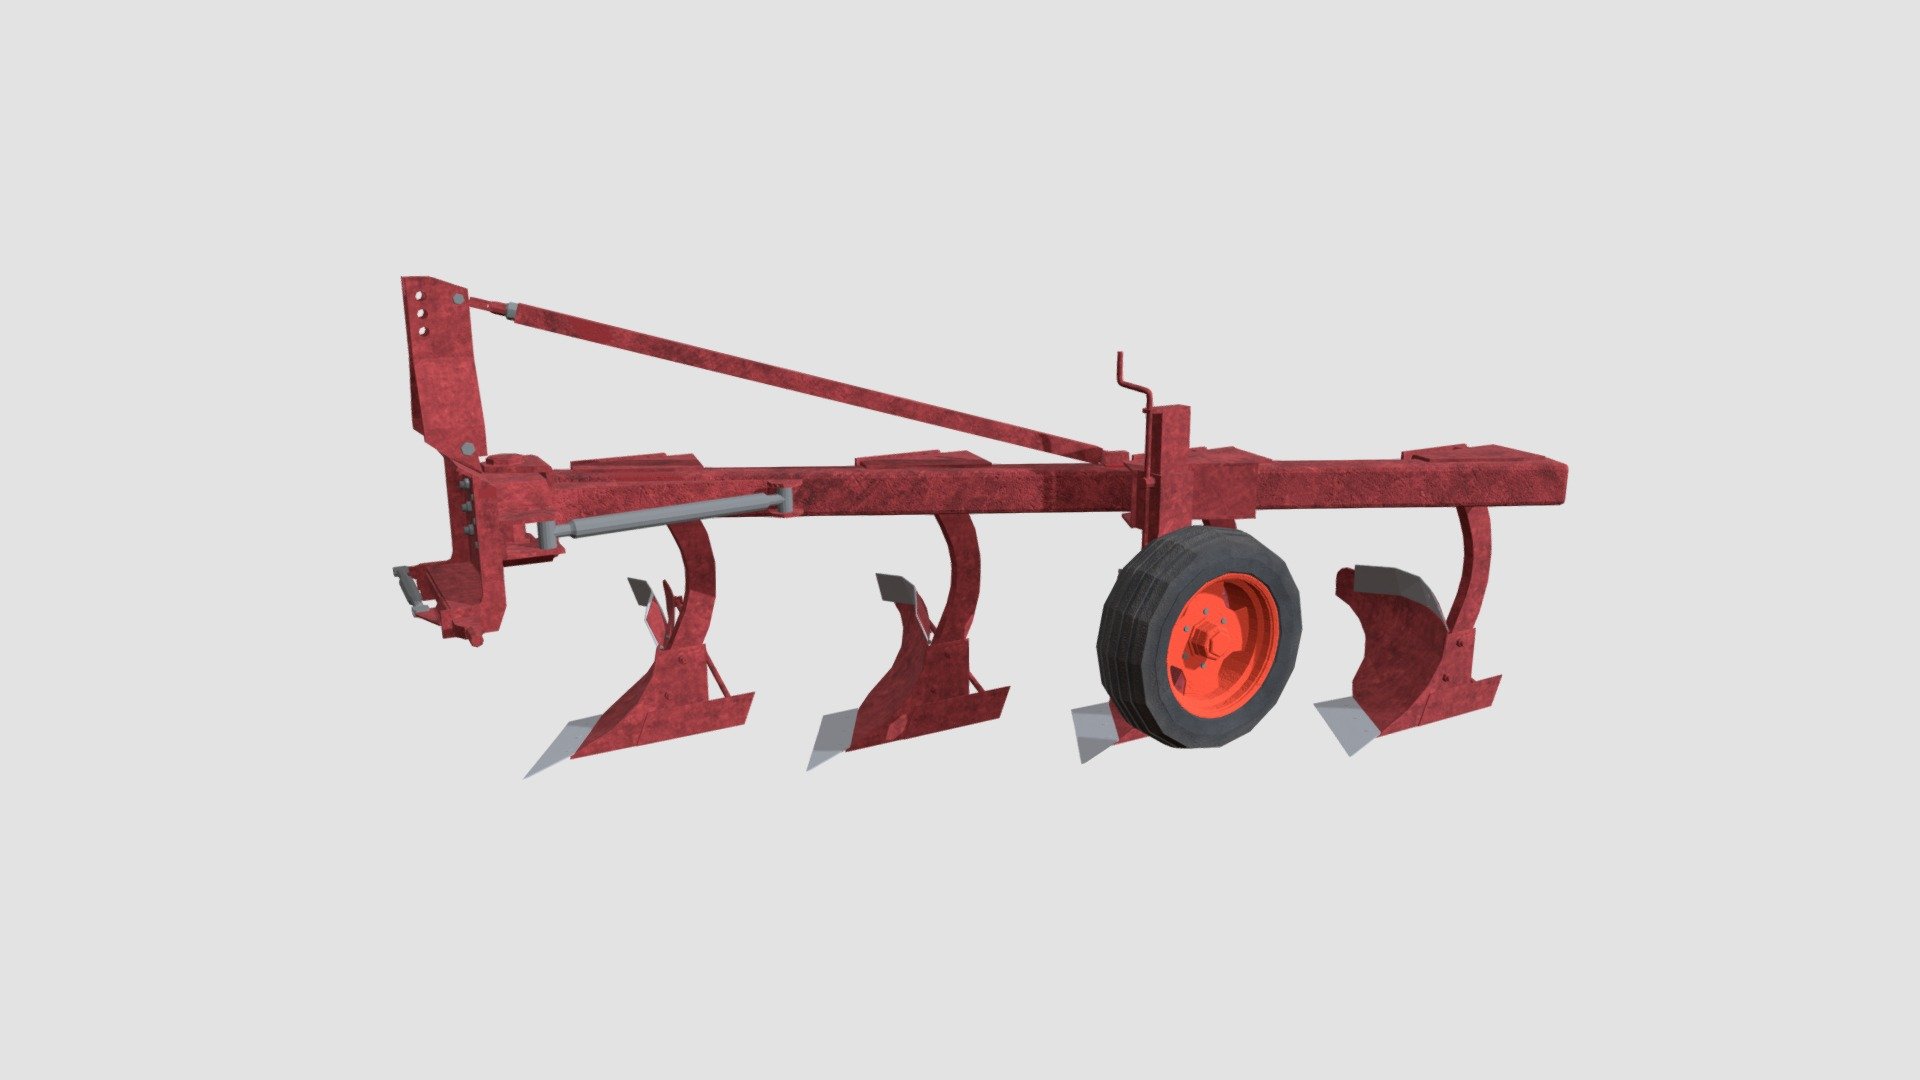 Highly detailed 3d model of plow with textures, shaders and materials. It is ready to use, just put it into your scene 3d model